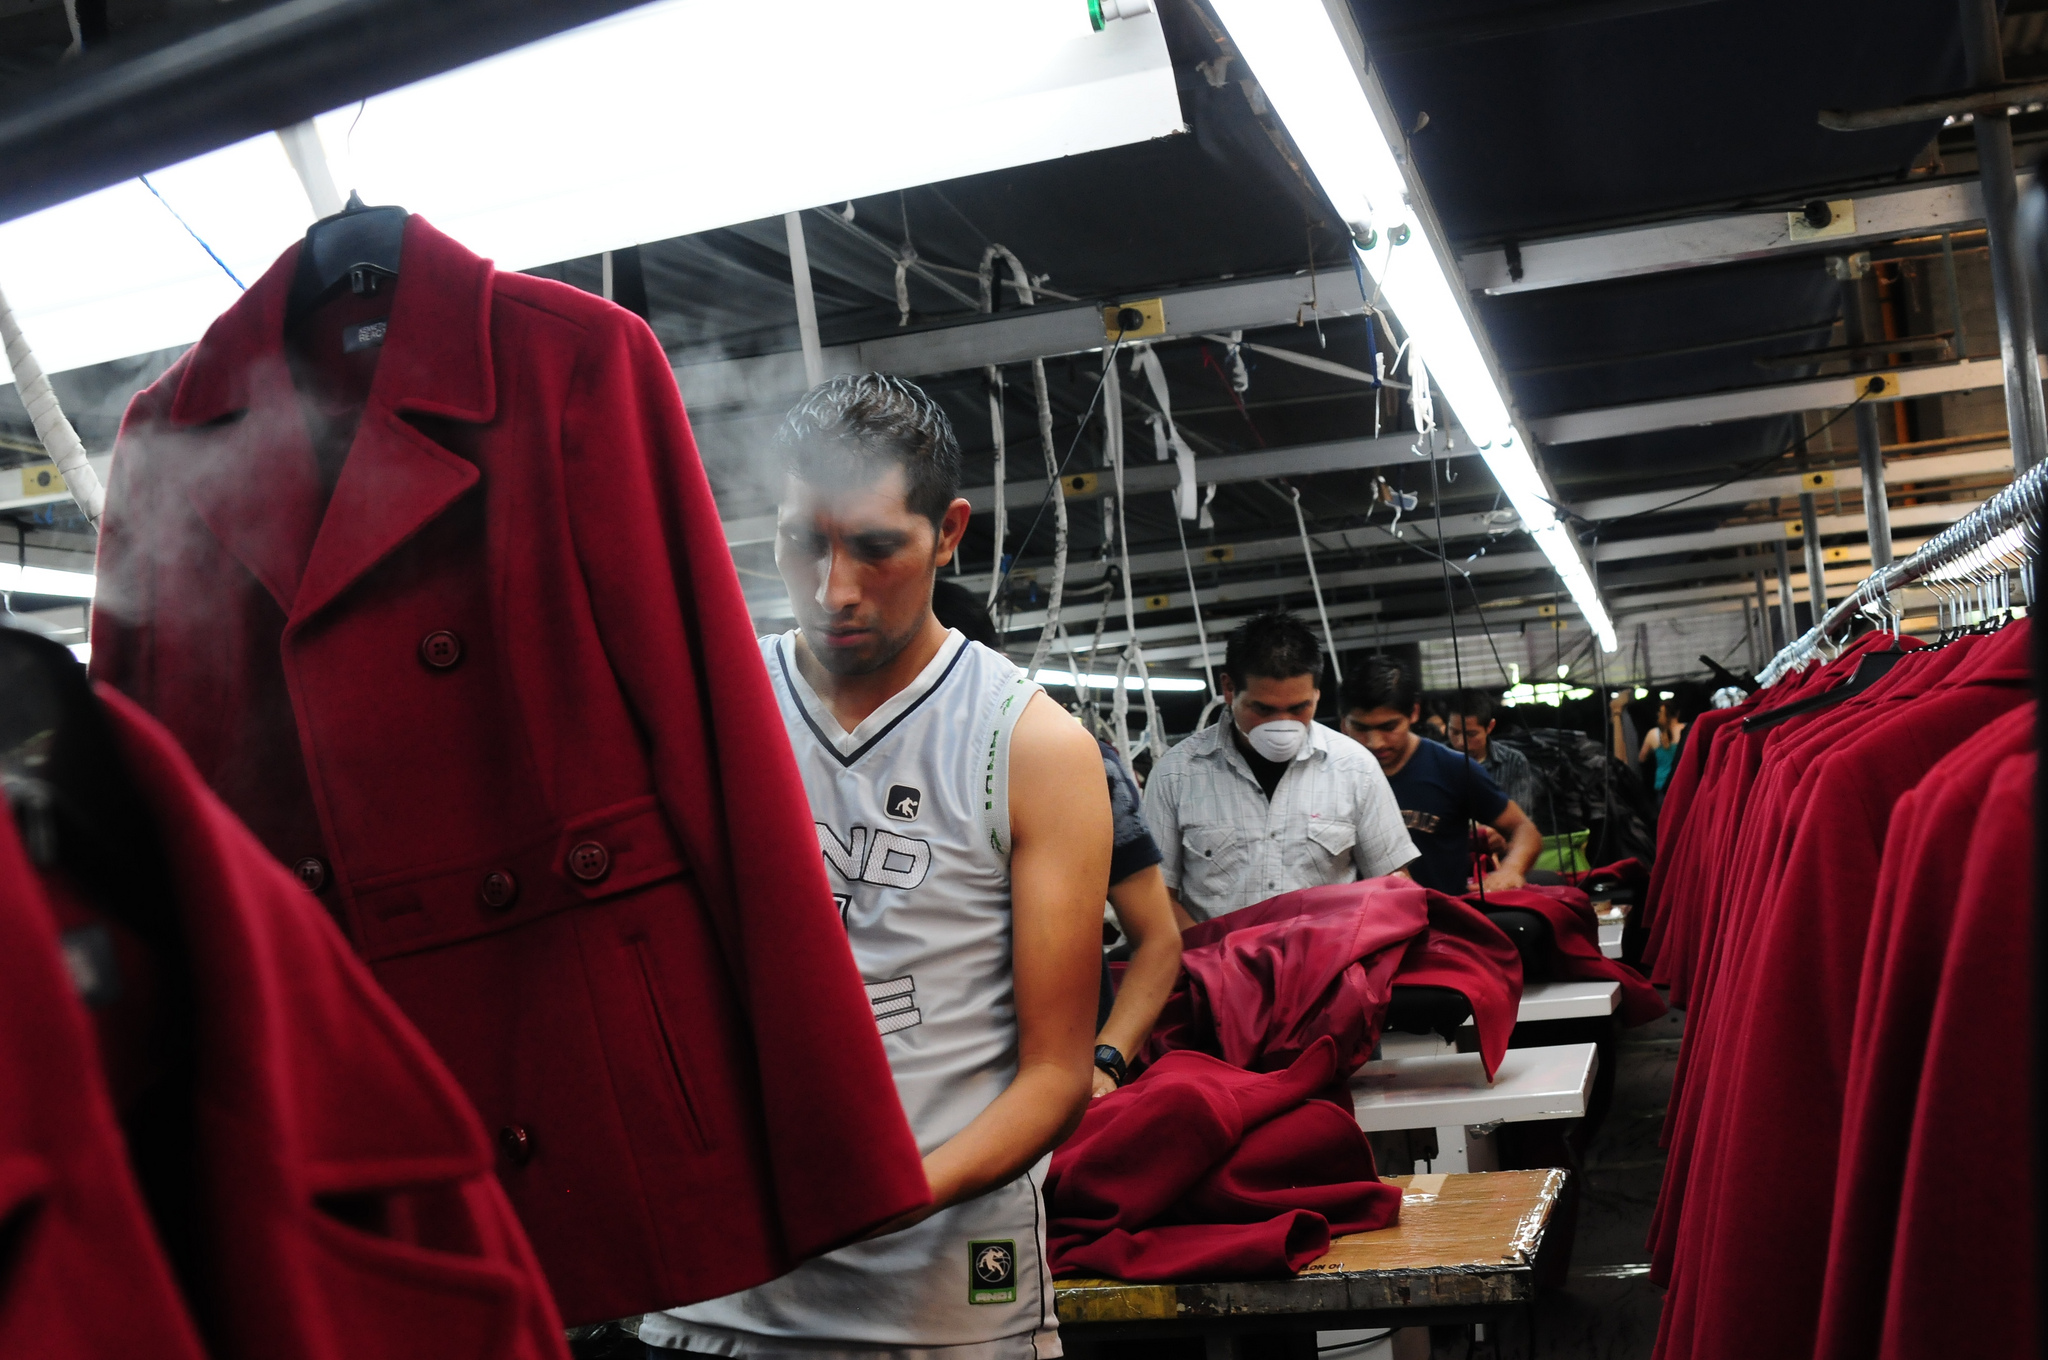 Garment factory workers in Guatemala